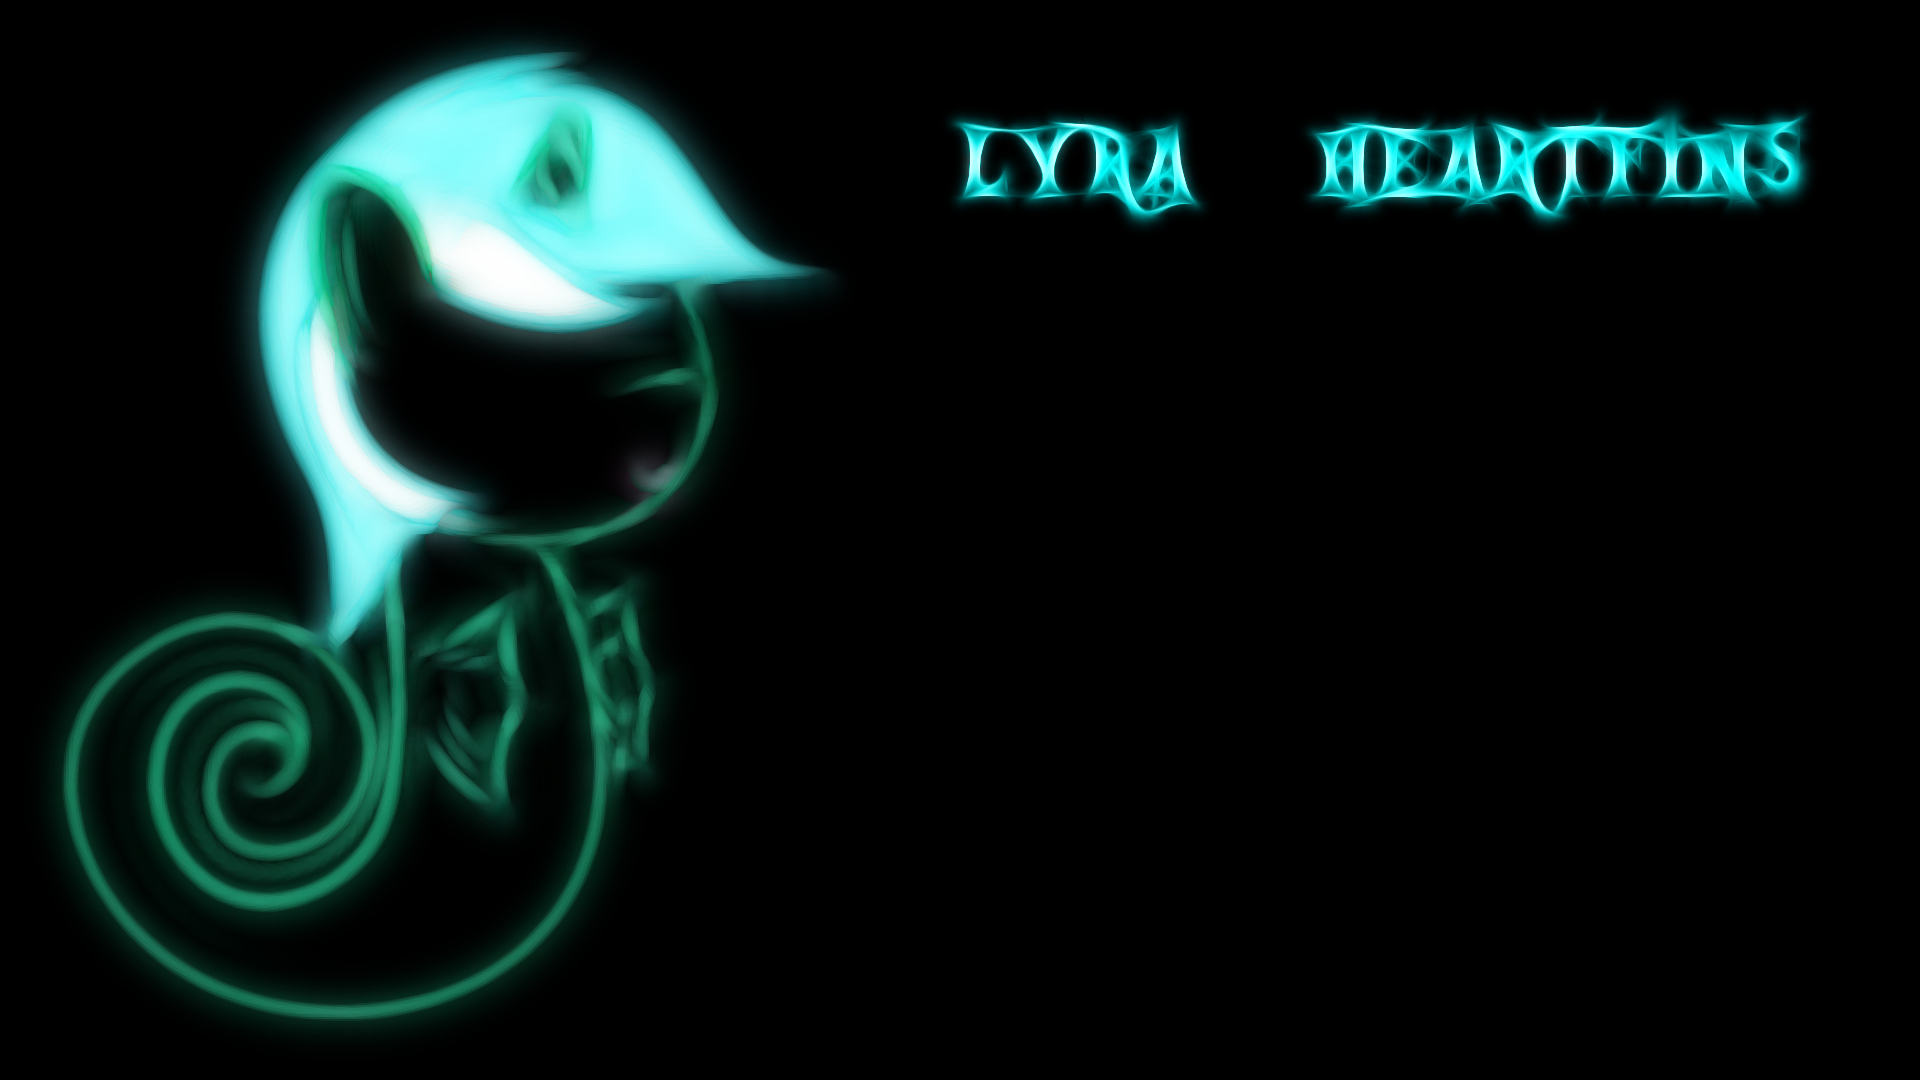 Lyra Heartfins by jaybud4 and Quanno3